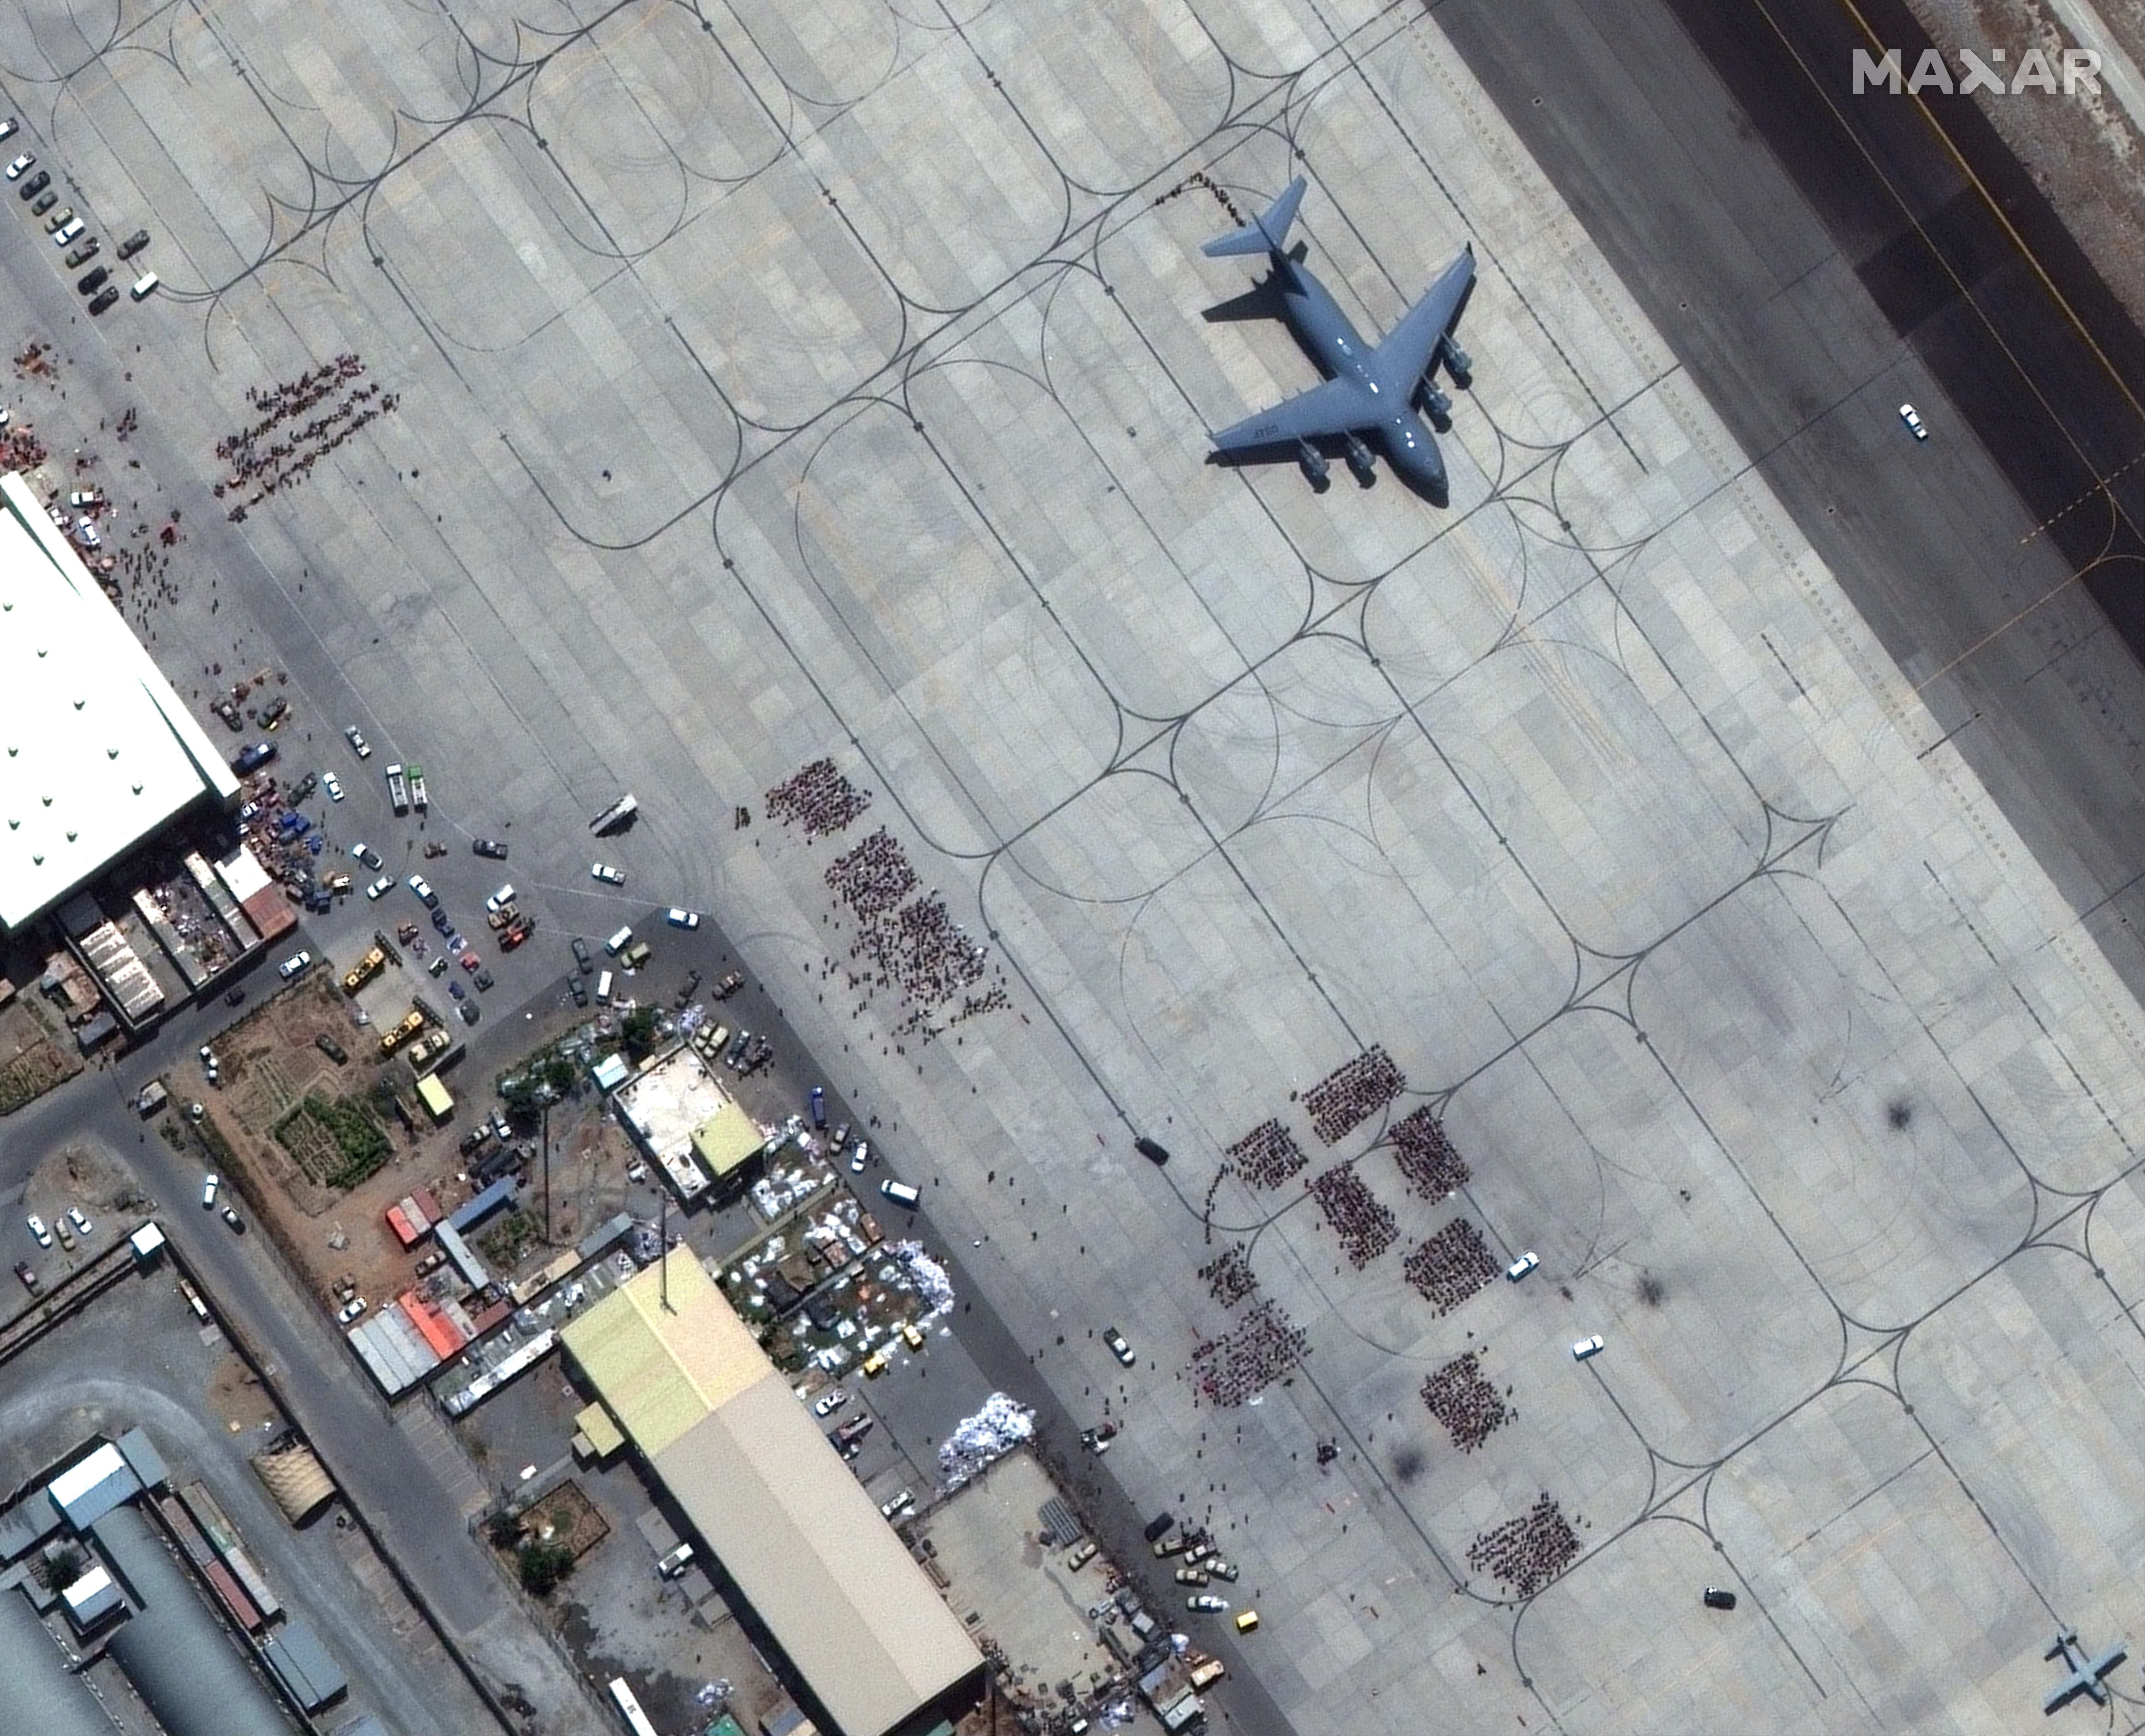 Groups of people wait on tarmac at Kabul's airport, Afghanistan August 23, 2021. SATELLITE IMAGE 2021 MAXAR TECHNOLOGIES/Handout via REUTERS